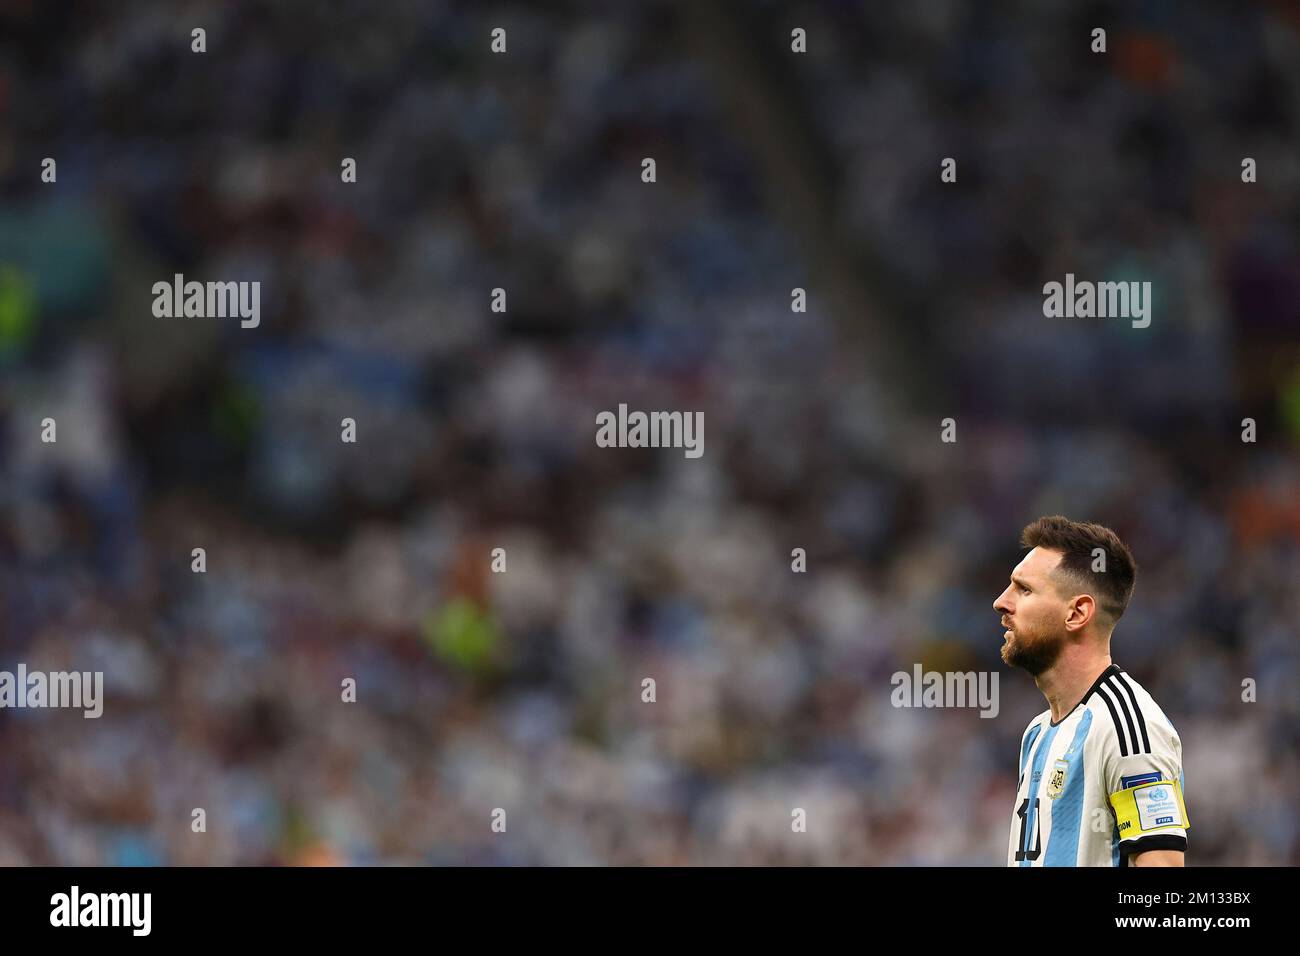 Lusail, Qatar. 9th Dec, 2022. Lionel Messi of Argentina looks on during the Quarterfinal between the Netherlands and Argentina of the 2022 FIFA World Cup at Lusail Stadium in Lusail, Qatar, Dec. 9, 2022. Credit: Ding Xu/Xinhua/Alamy Live News Stock Photo